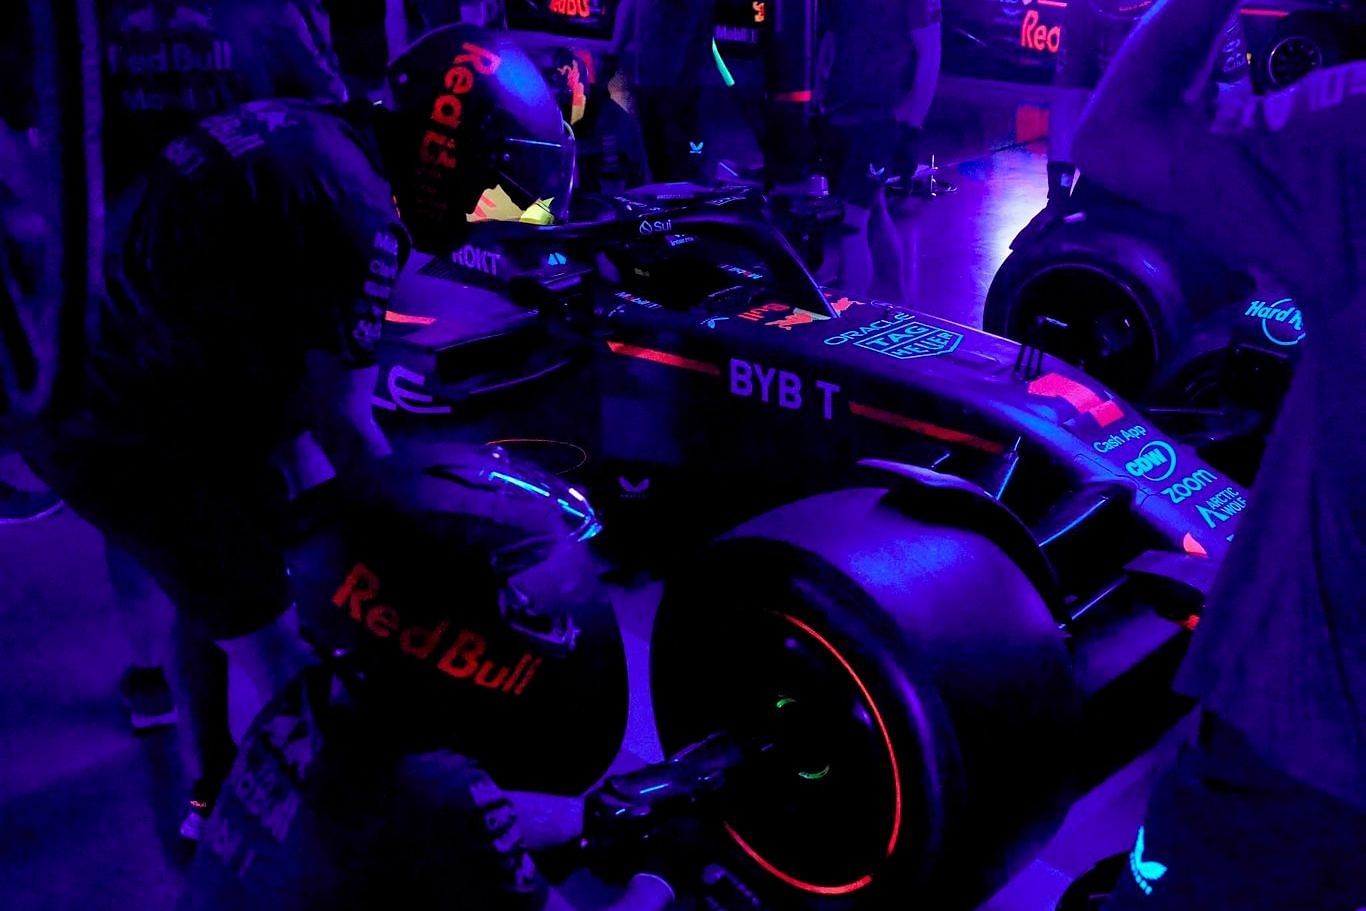 The Red Bull Racing crew performing a pit stop in pitch-black dark